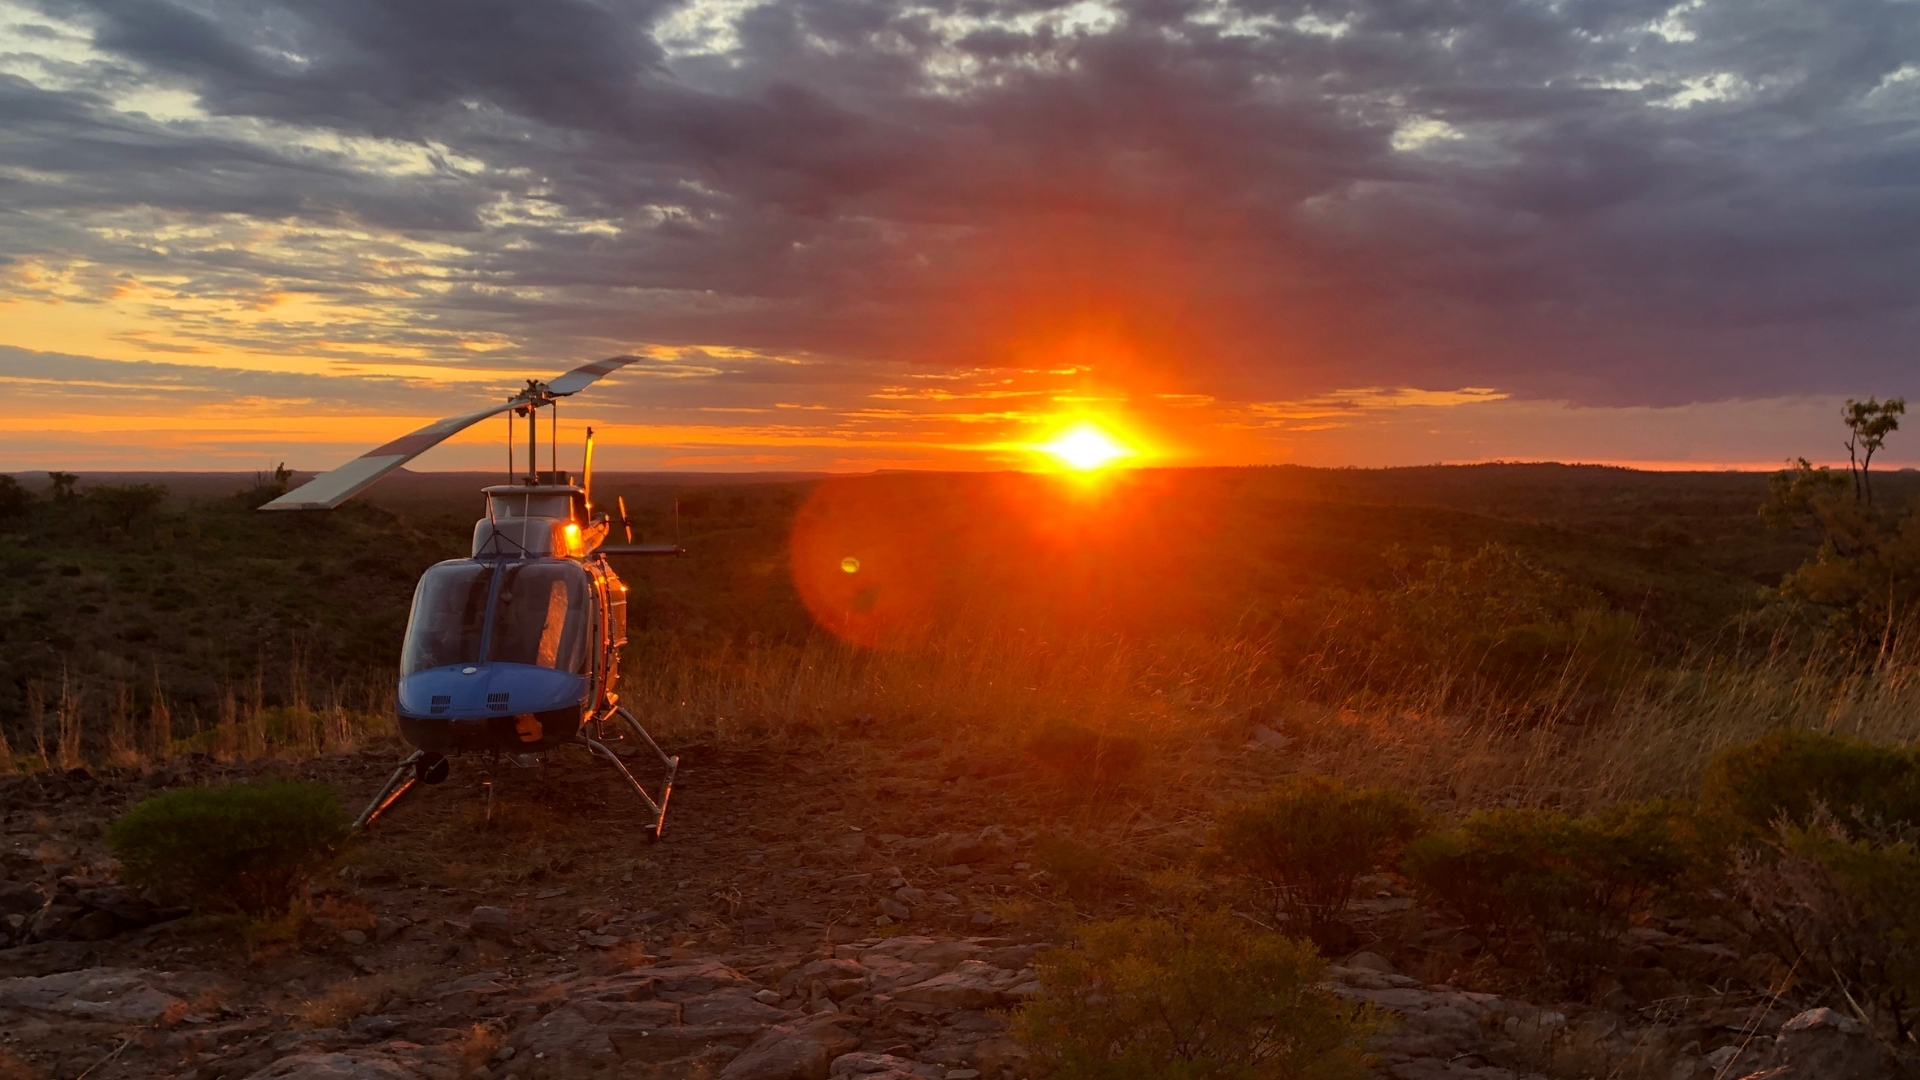 The Complete Katherine Gorge Tour with Remote Landing